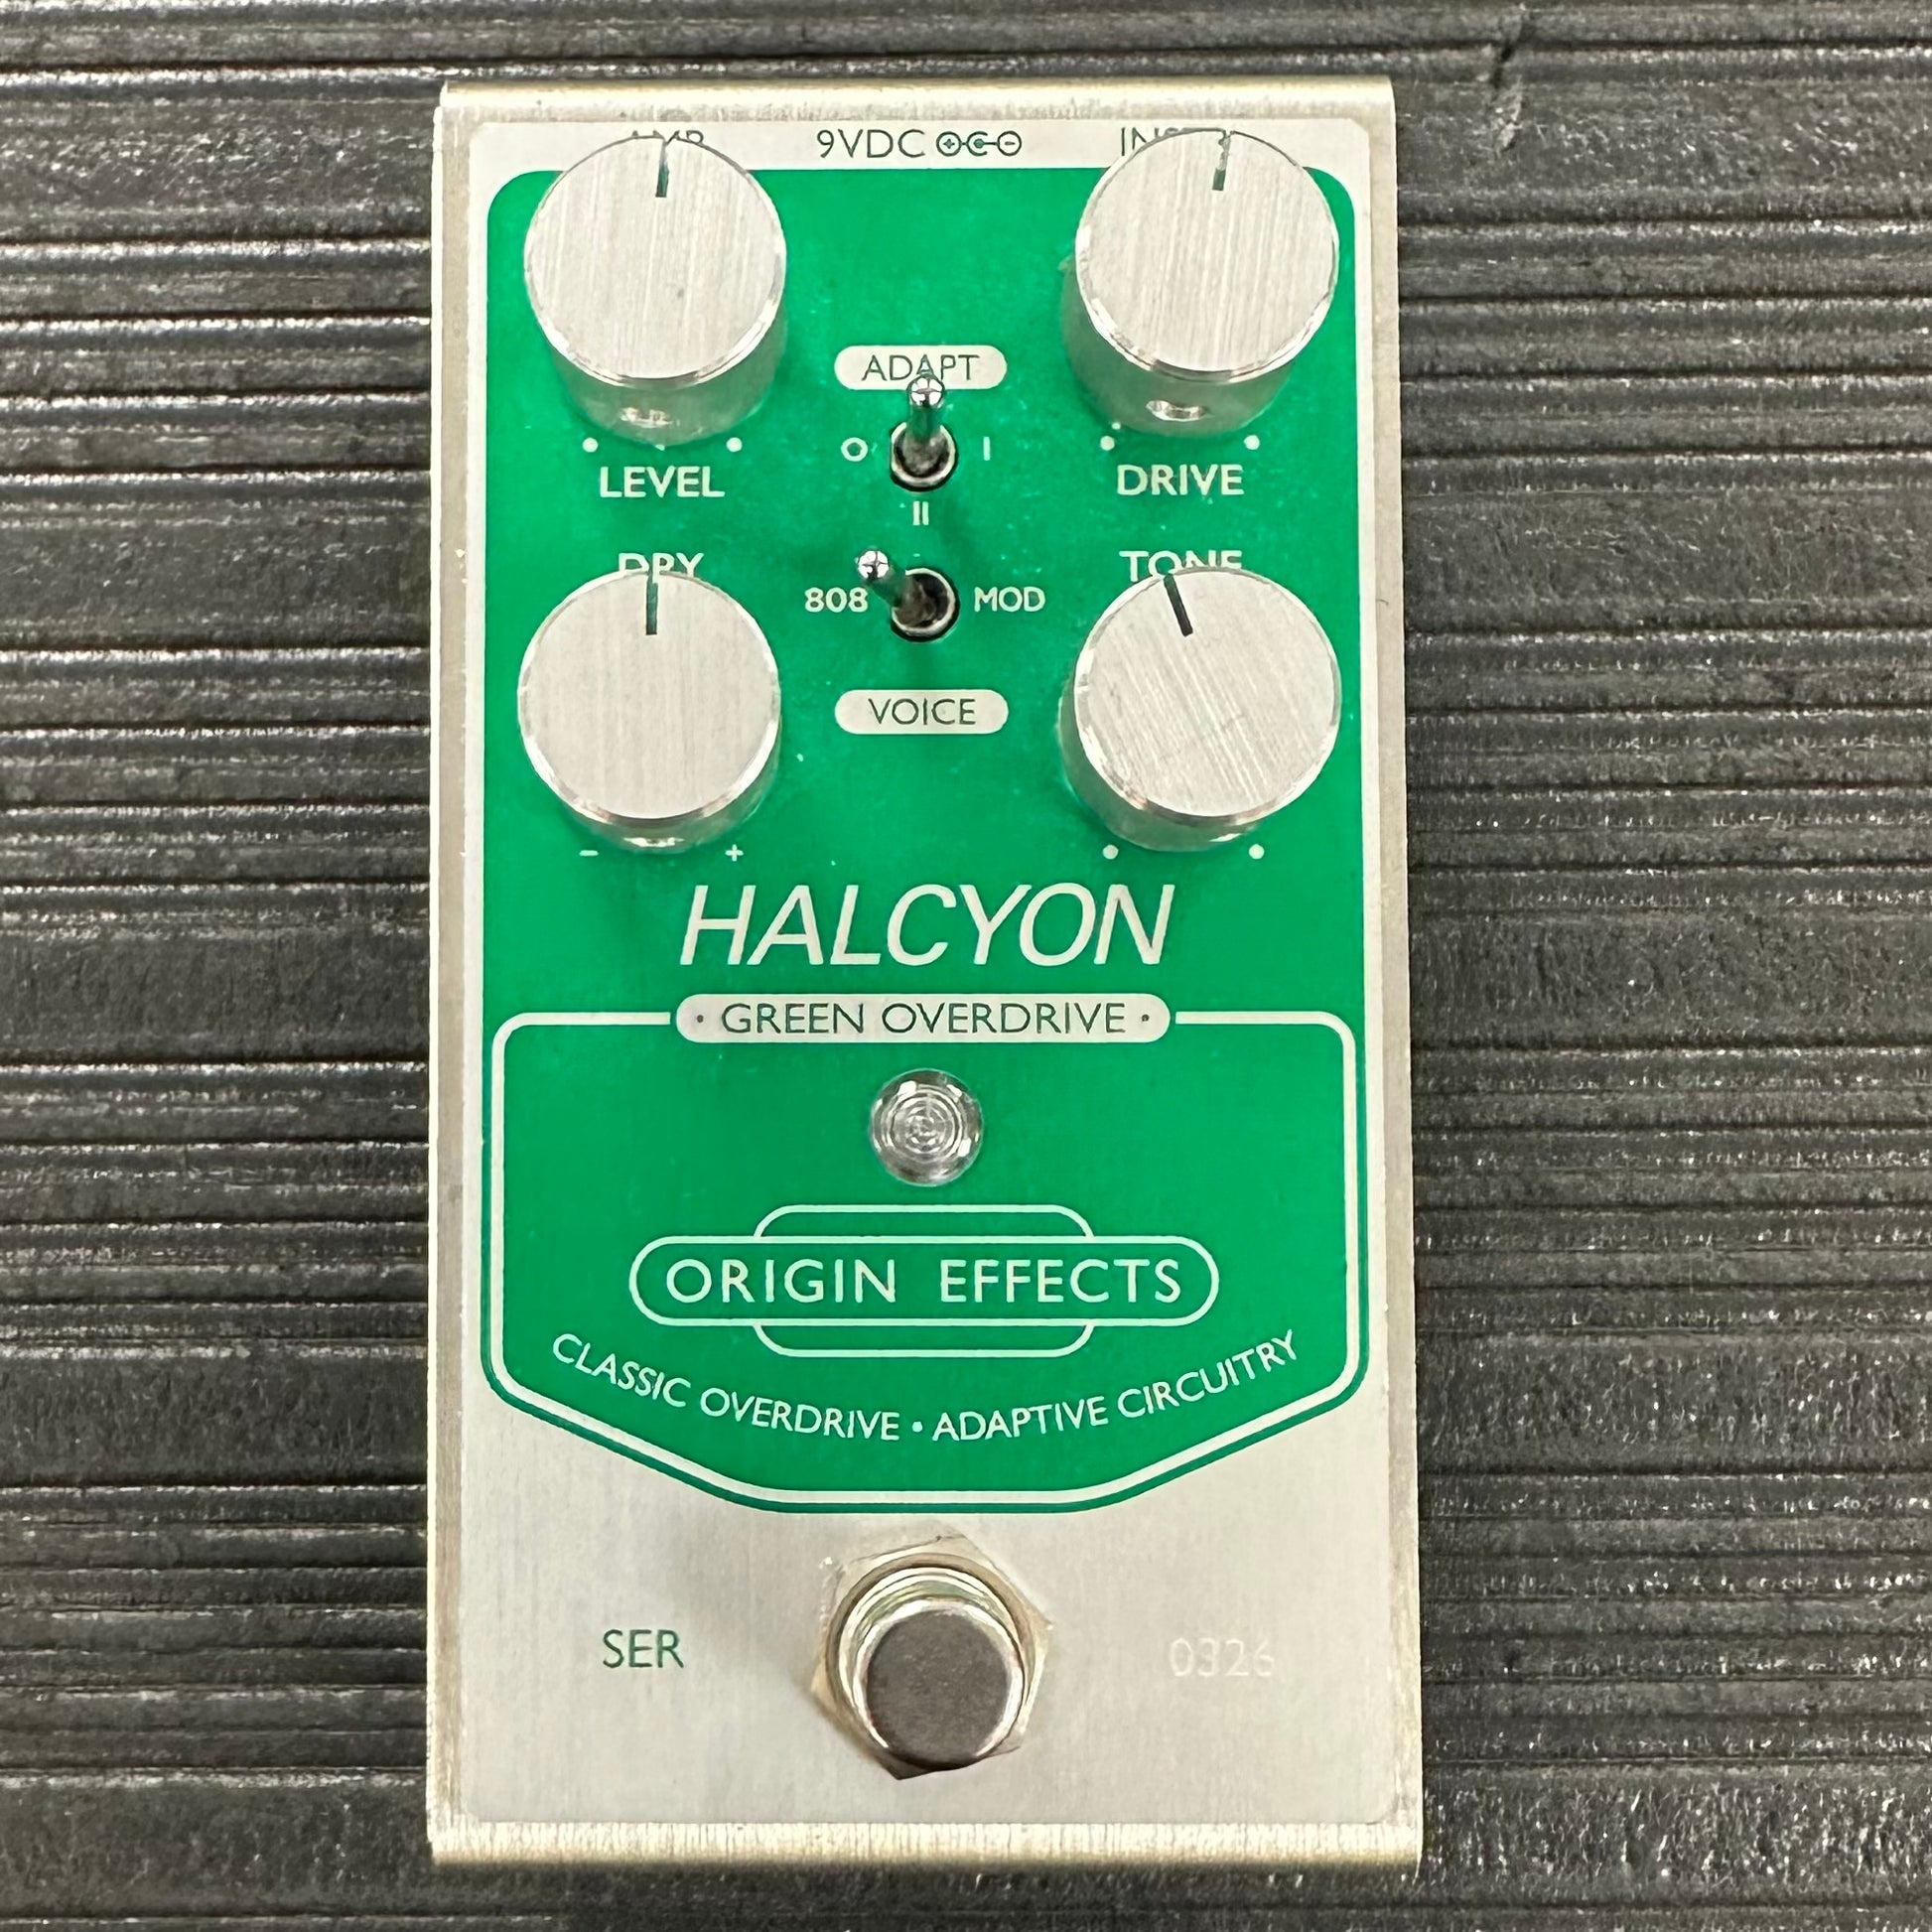 Top of Used Origin Effects Halcyon Overdrive TSS4047